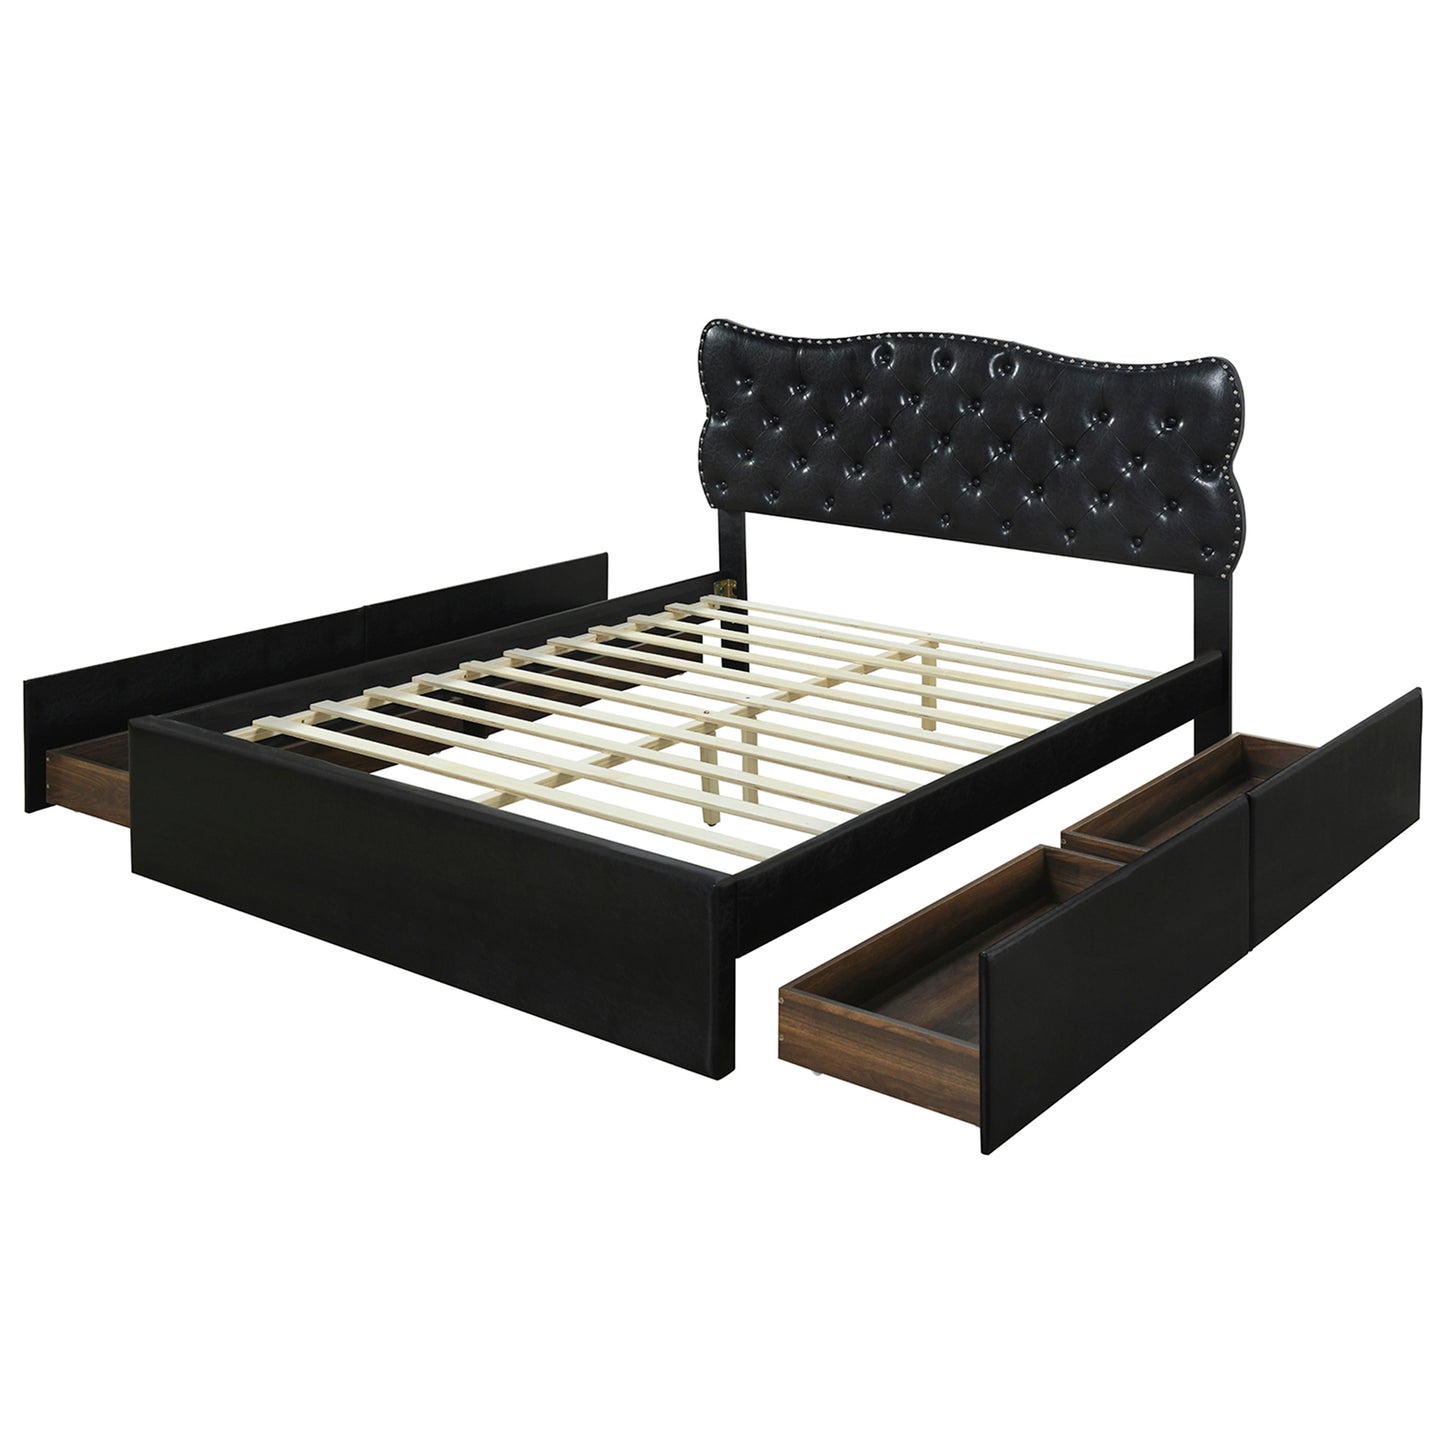 Queen Size Bed Frame with 4 Storage Drawers,Leather Upholstered Platform Heavy Duty Bed,Wood Slat Support,Black